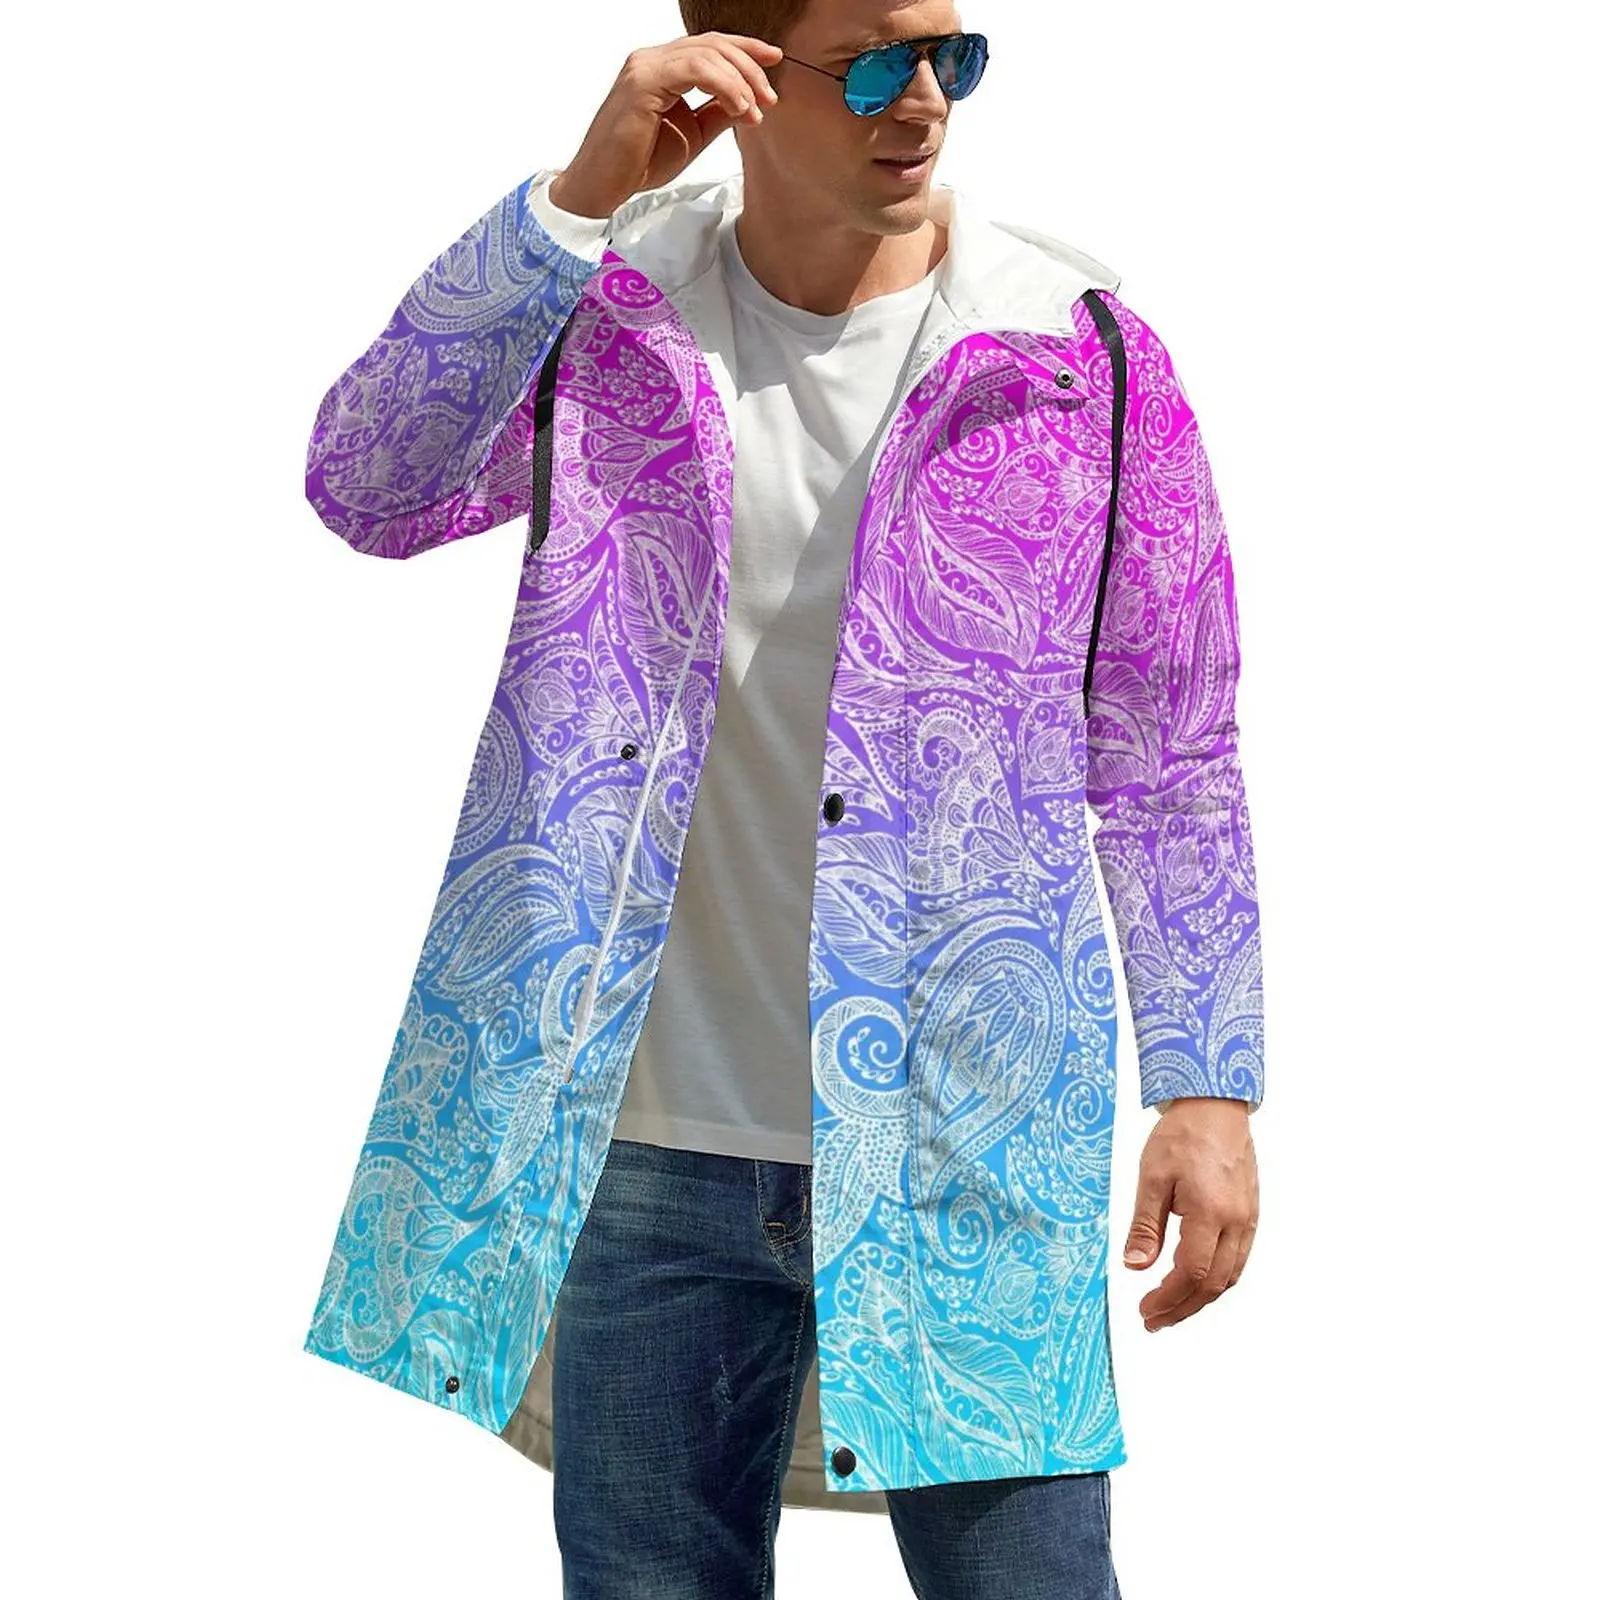 

Pink to Blue Ombre Coats White Floral Paisley Aesthetic Casual Autumn Jackets Outdoor Windbreakers Oversized Waterproof Clothing